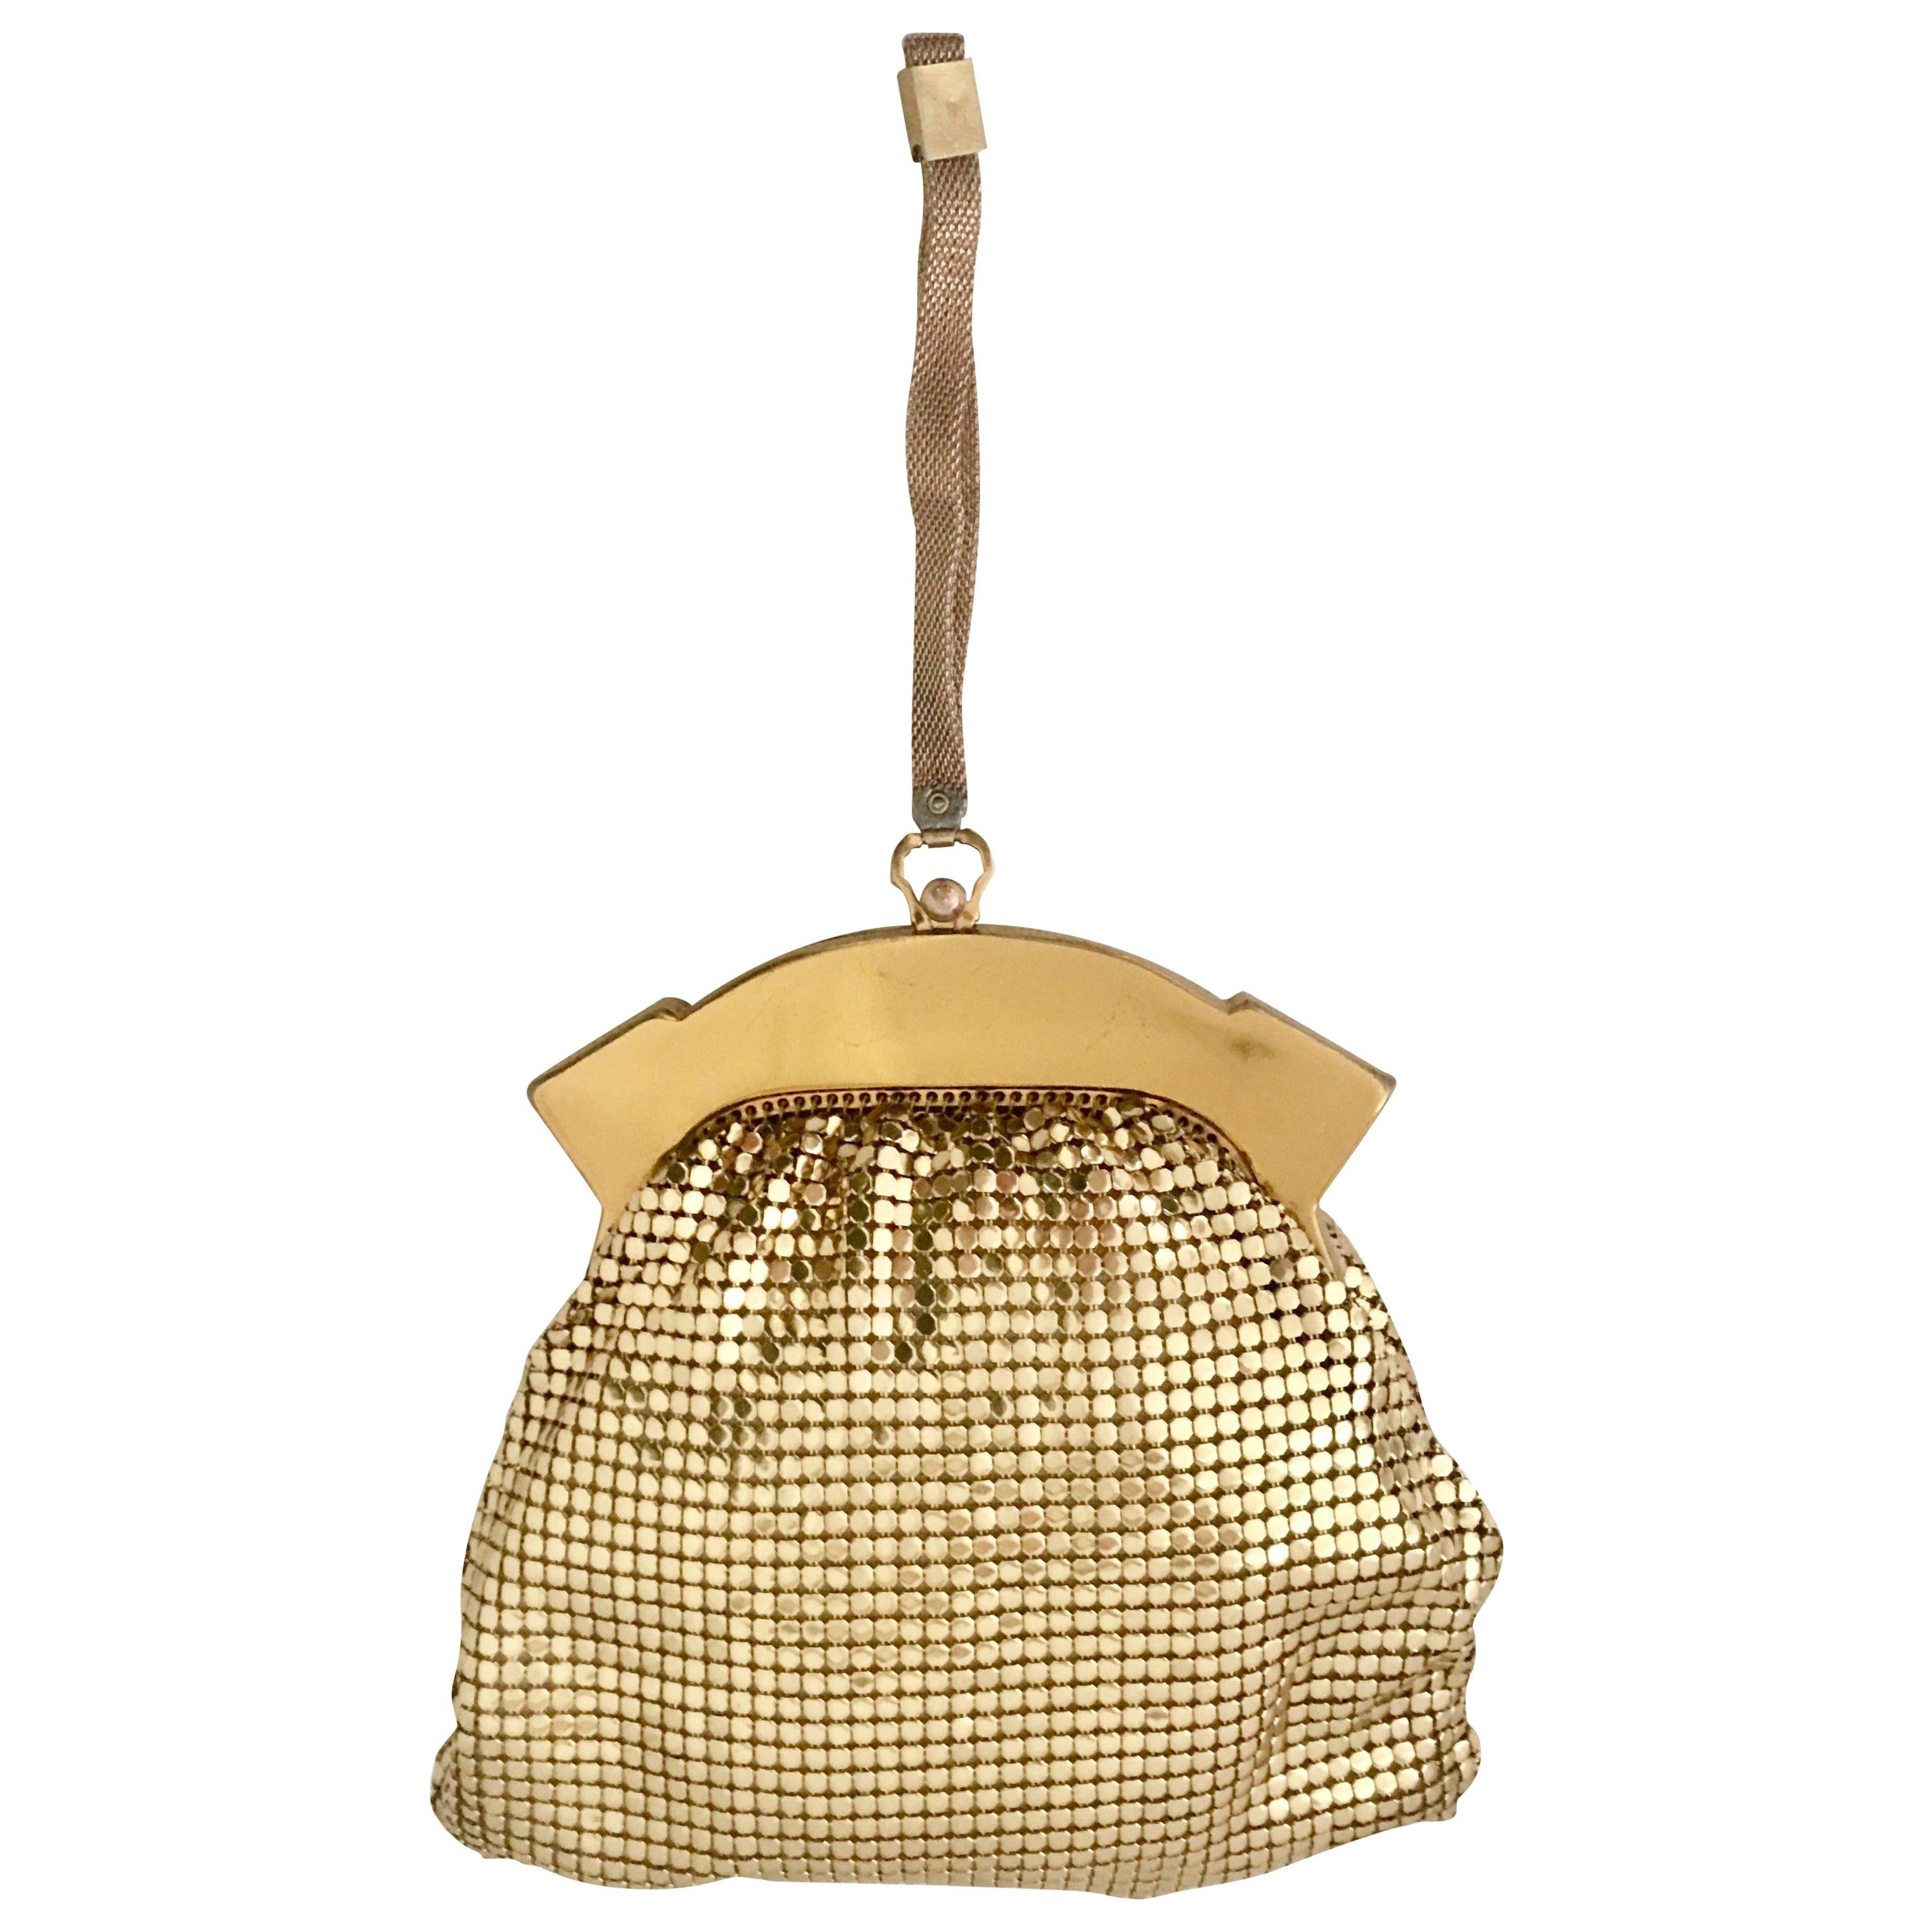 1930'S Whiting and Davis Gold Metal Mesh Wristlet Evening Bag For Sale ...